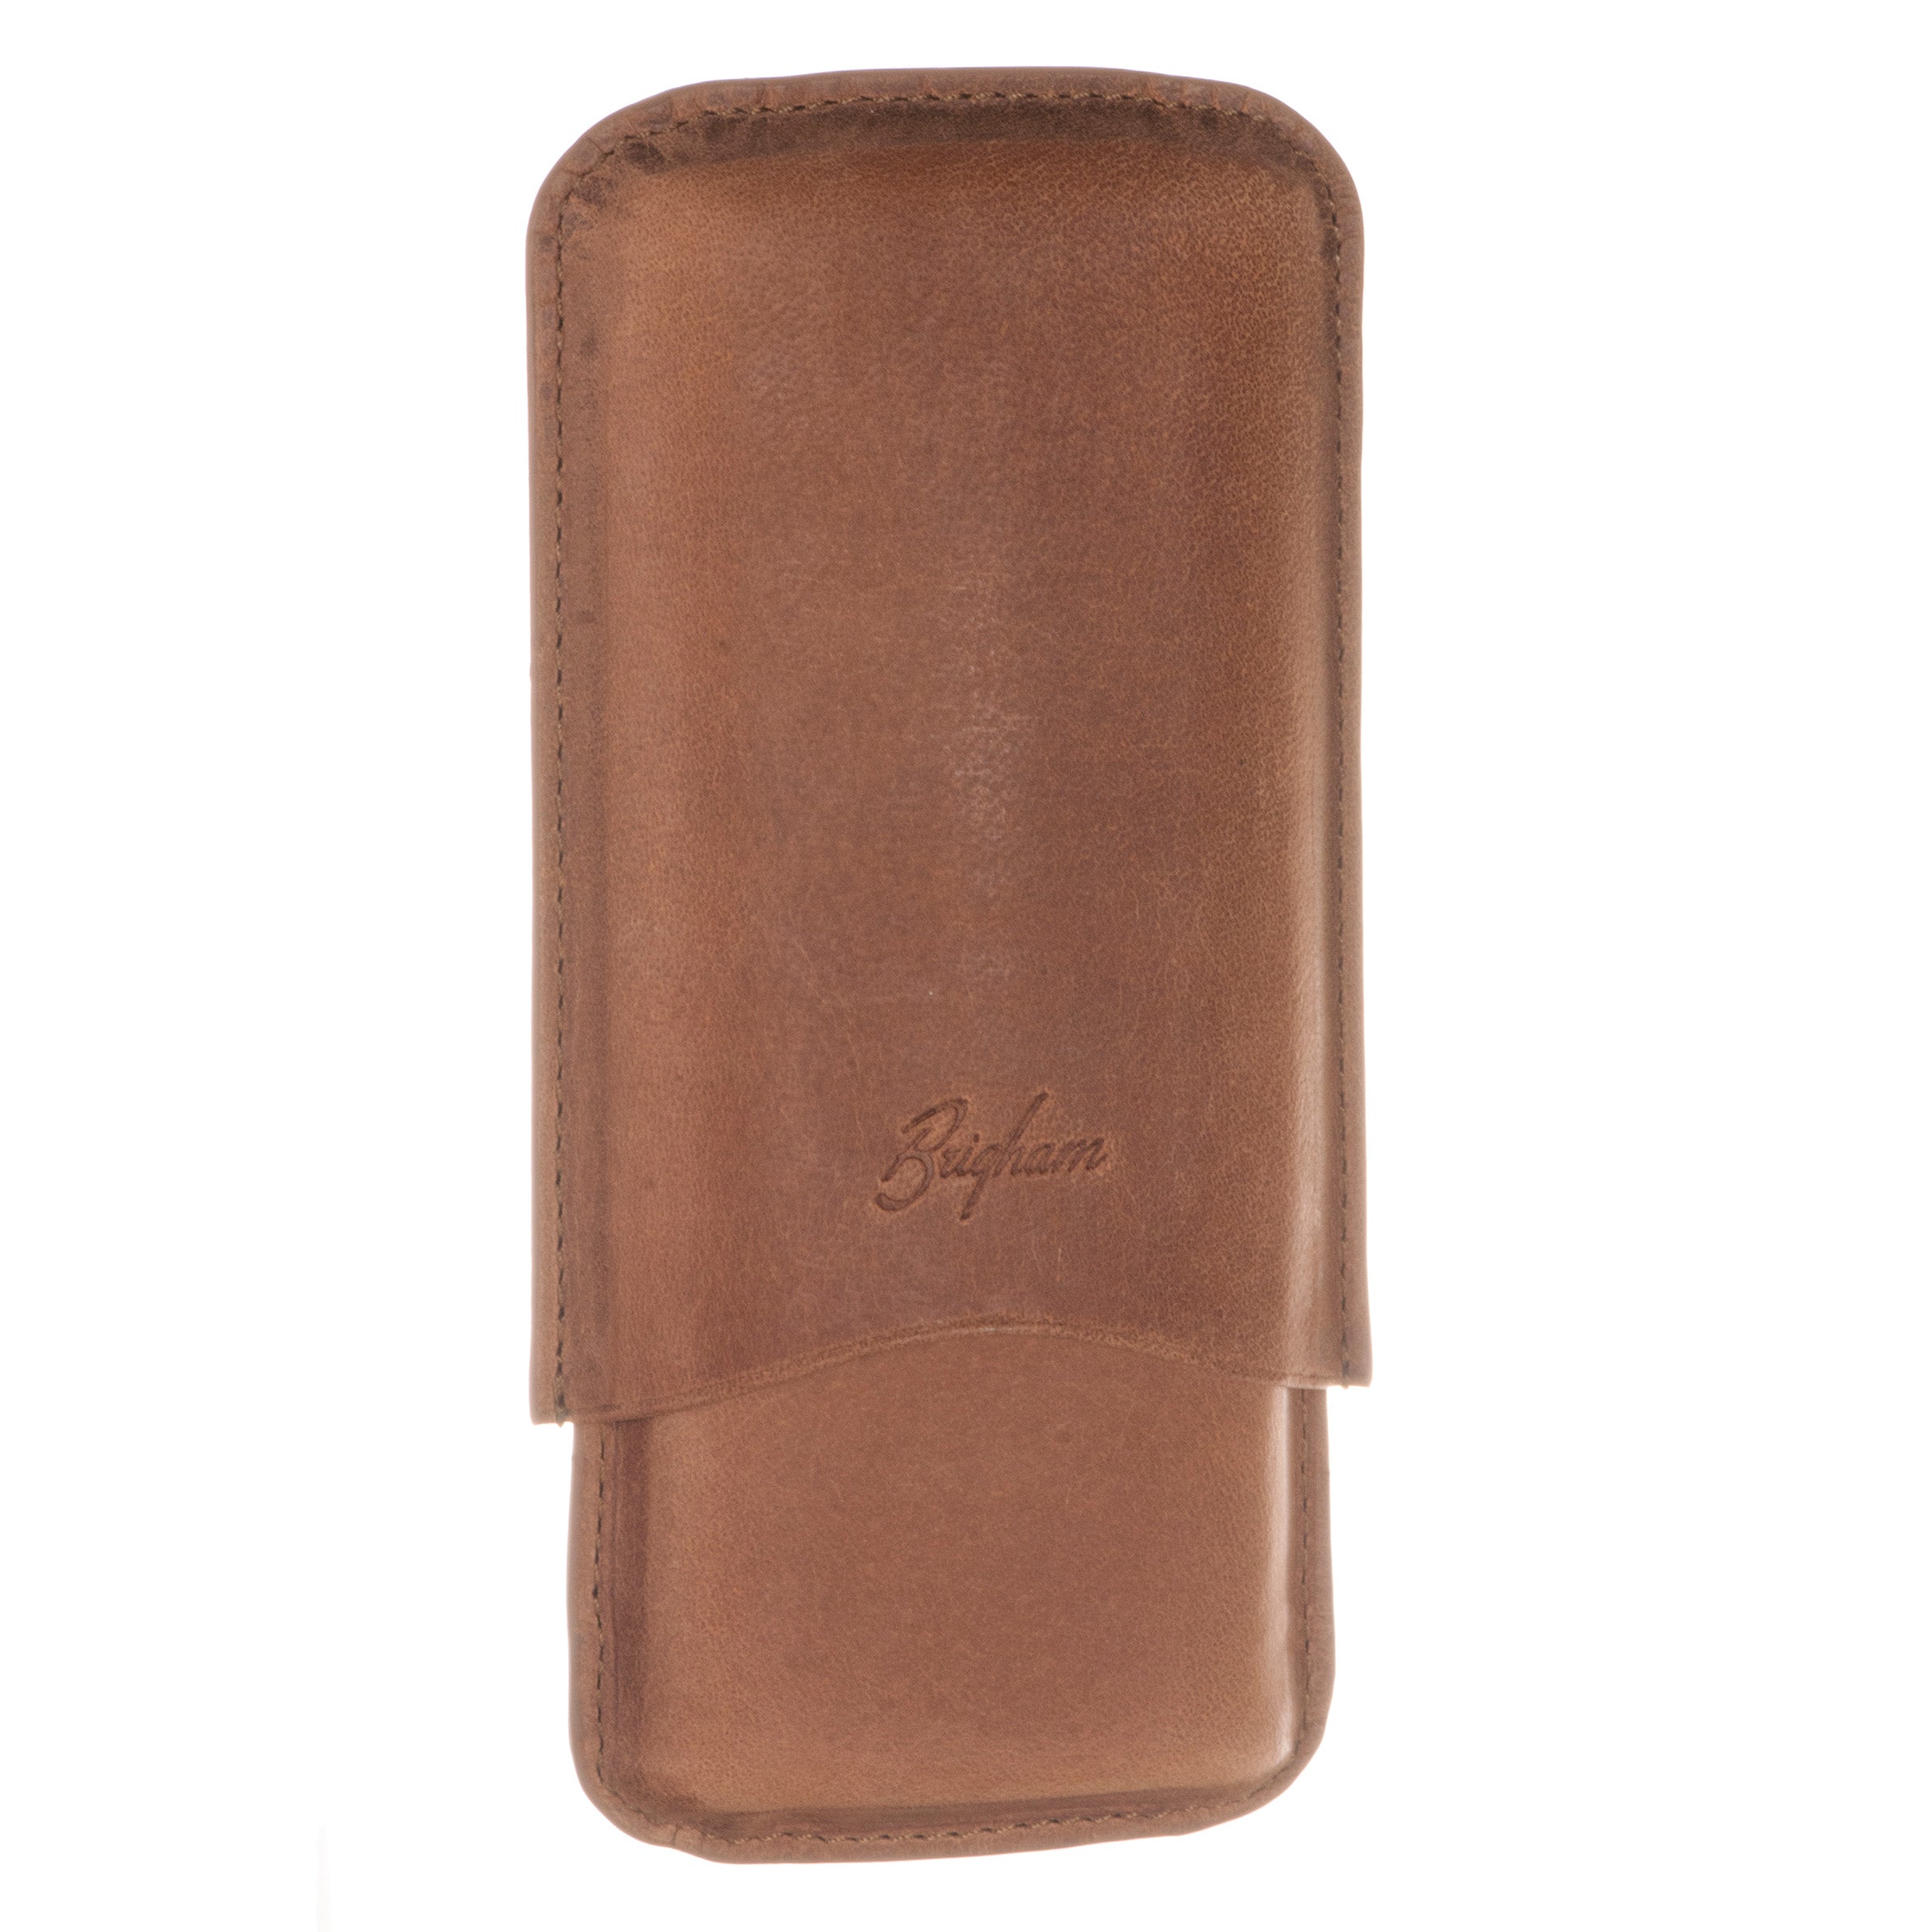 Brigham Brown Leather Cigar Cases